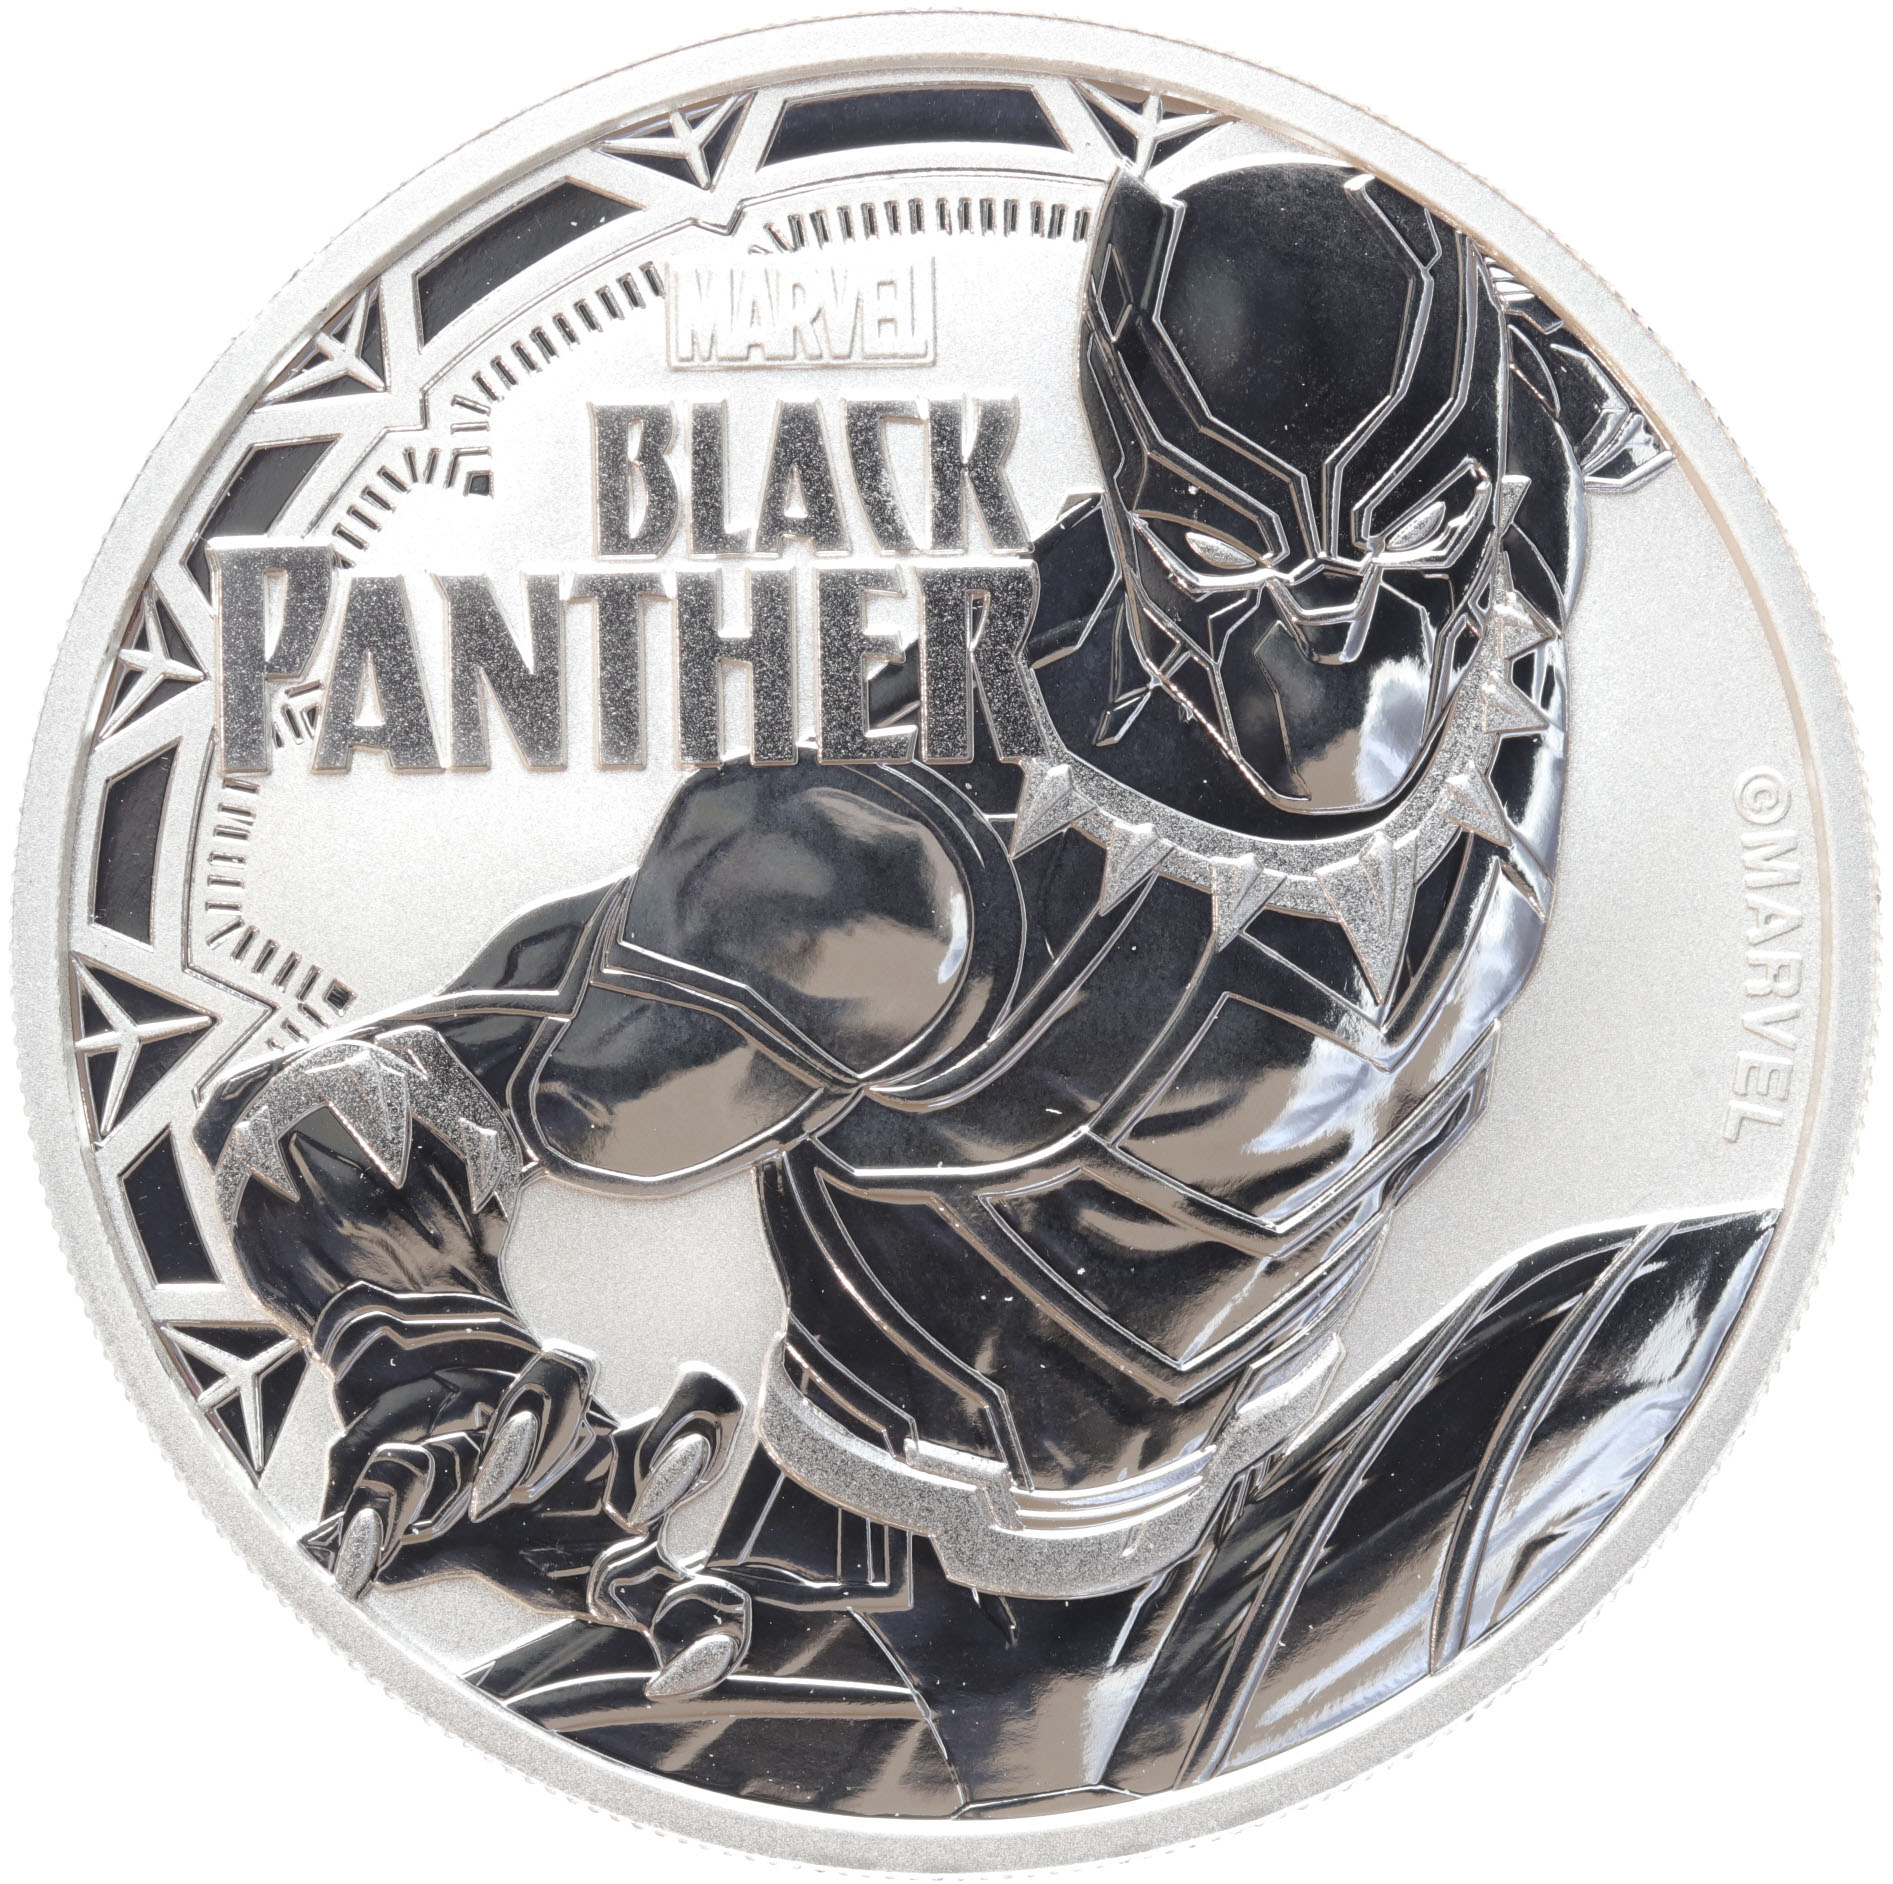 Tuvalu Marvel Black Panther 2018 1 ounce silver